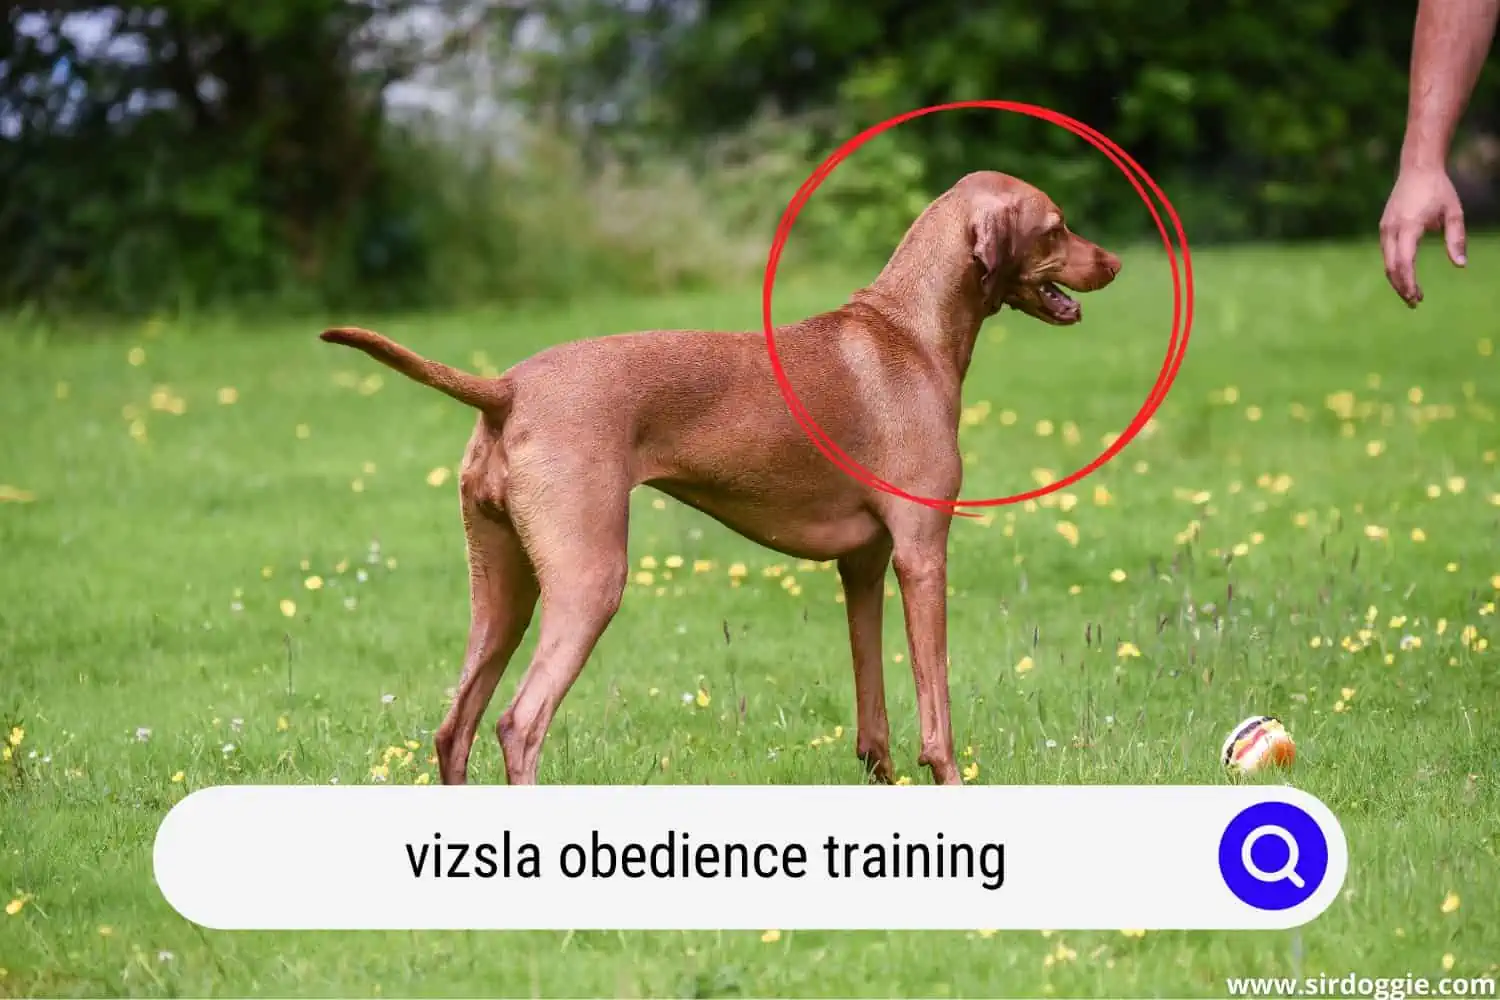 owner and vizsla for obedience training